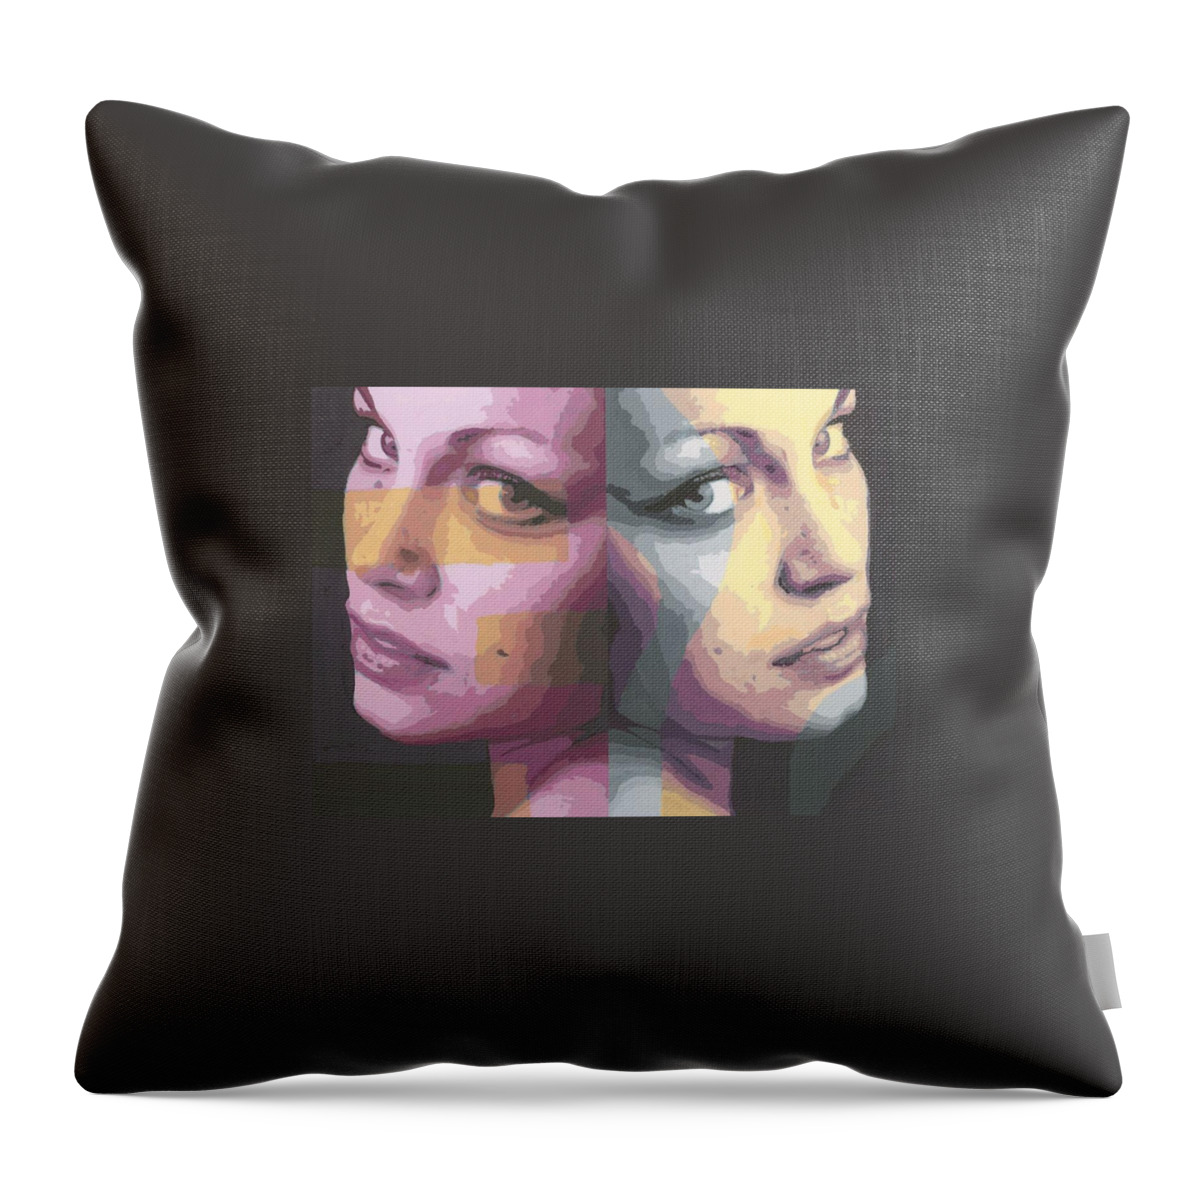 Faces Throw Pillow featuring the painting Faces by Rachel Bochnia